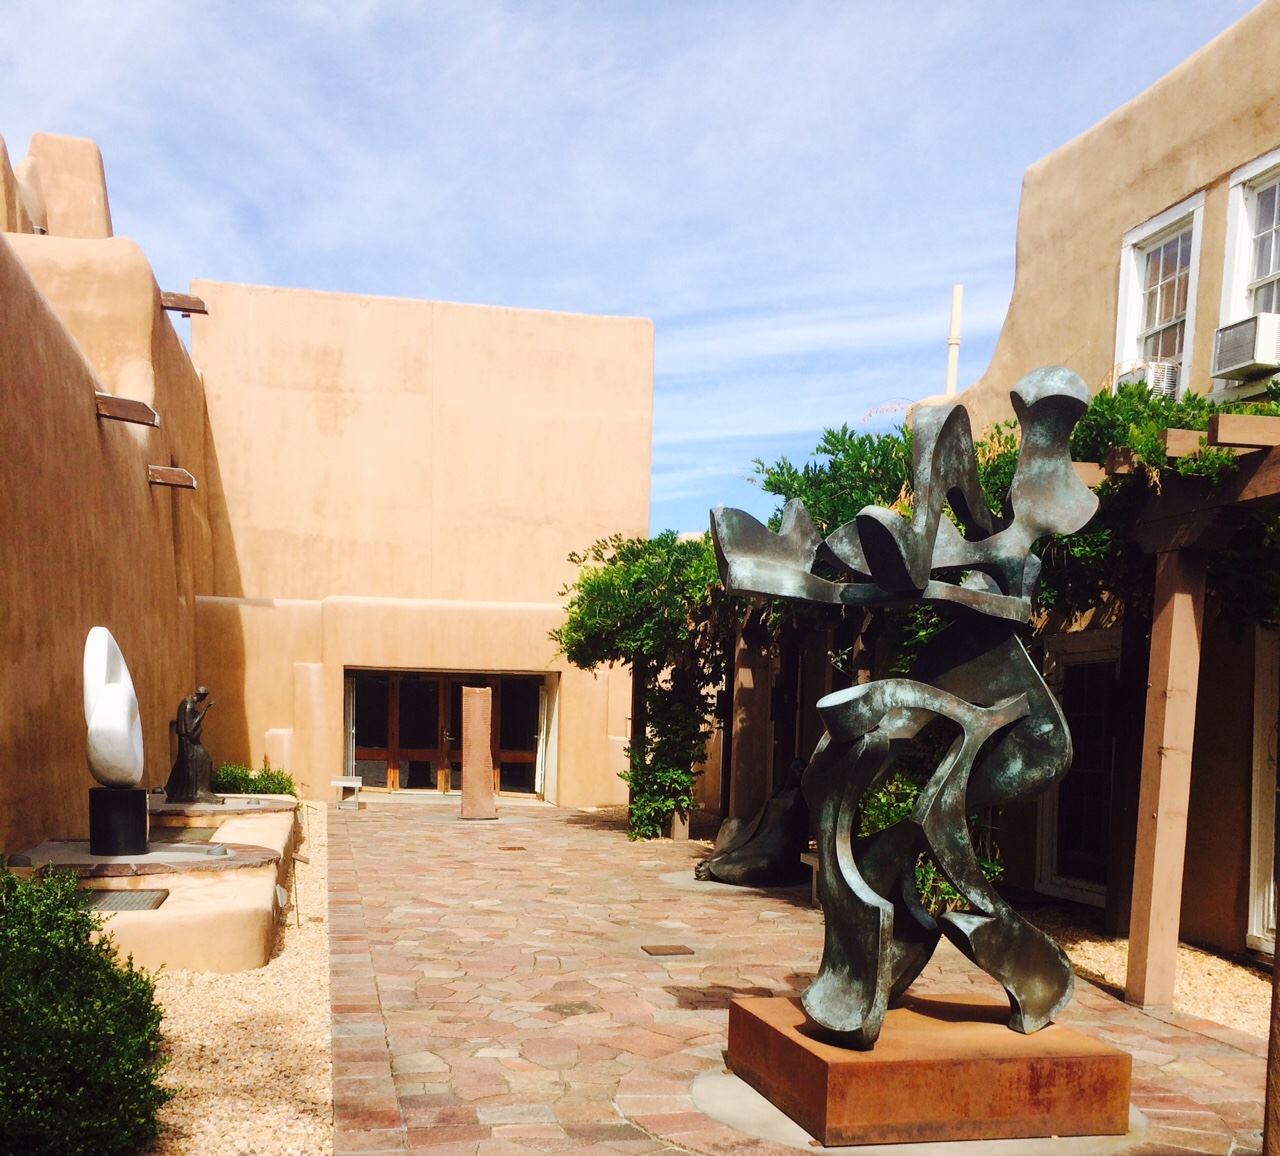 New Mexico Museum of Art - 2